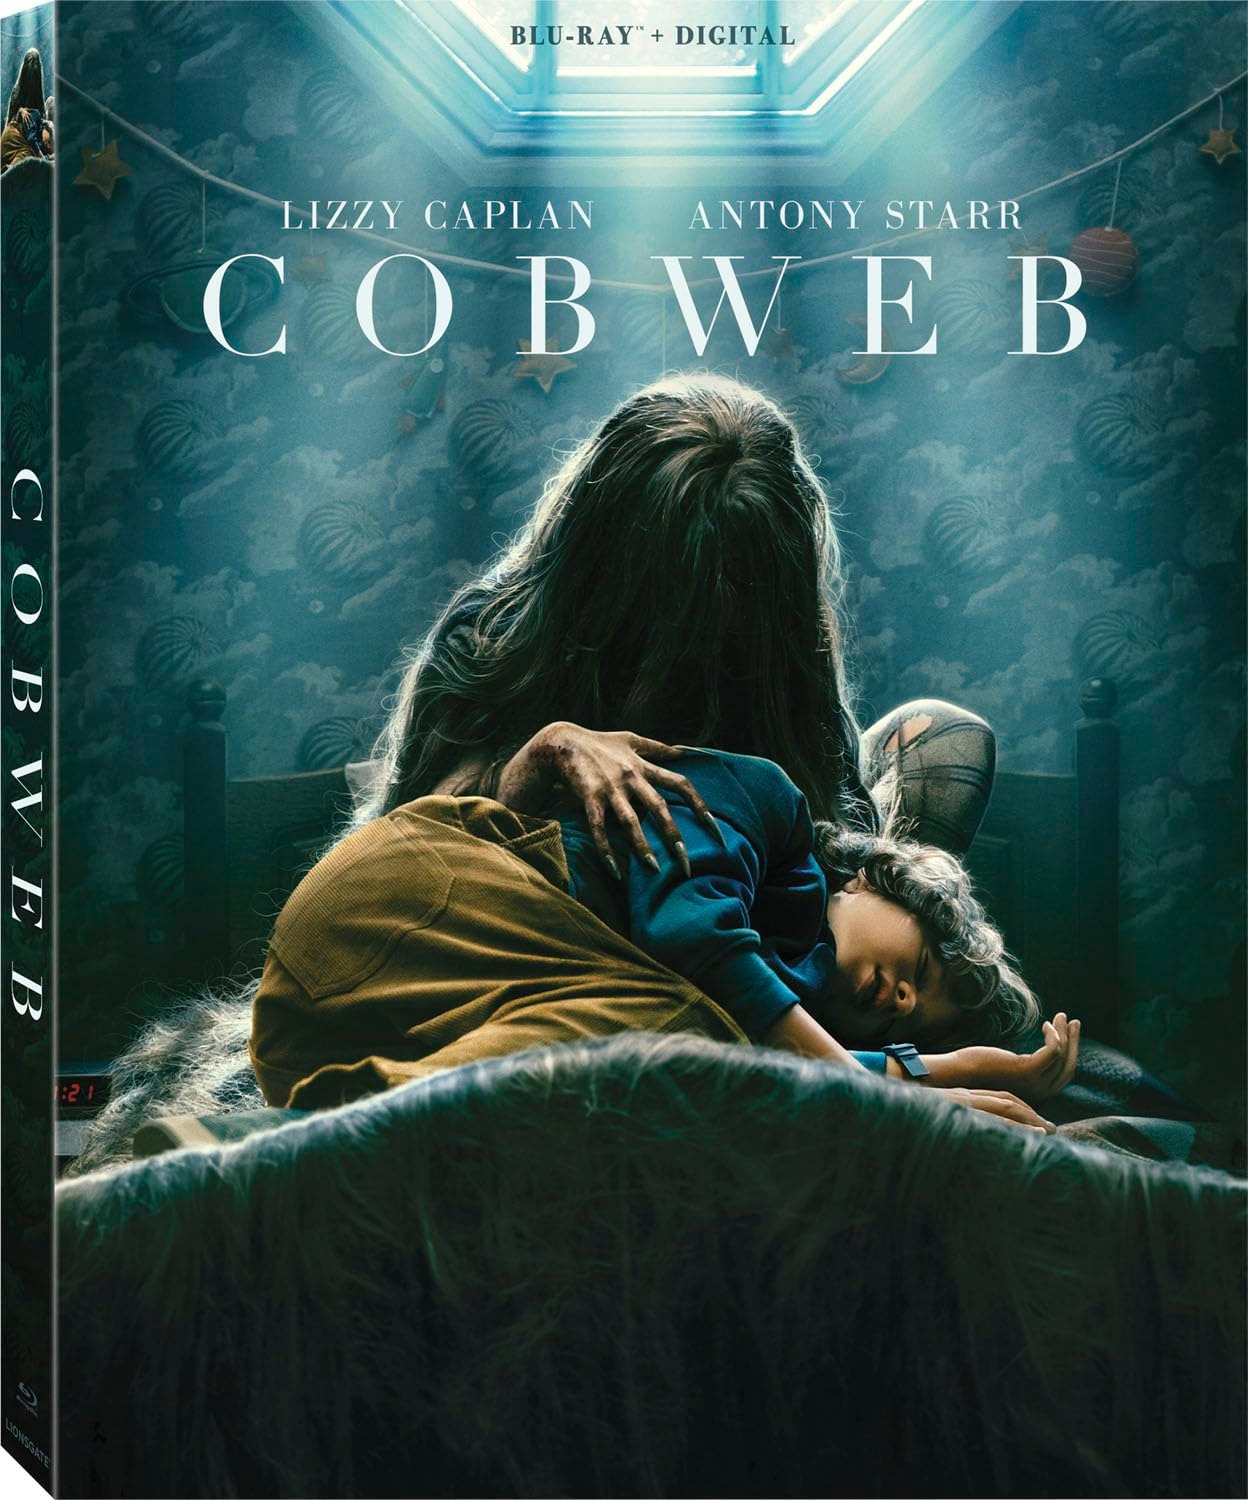 The Horrors of Halloween Whats on Tonight COBWEB (2023) on Digital + Blu-ray/DVD Release Date